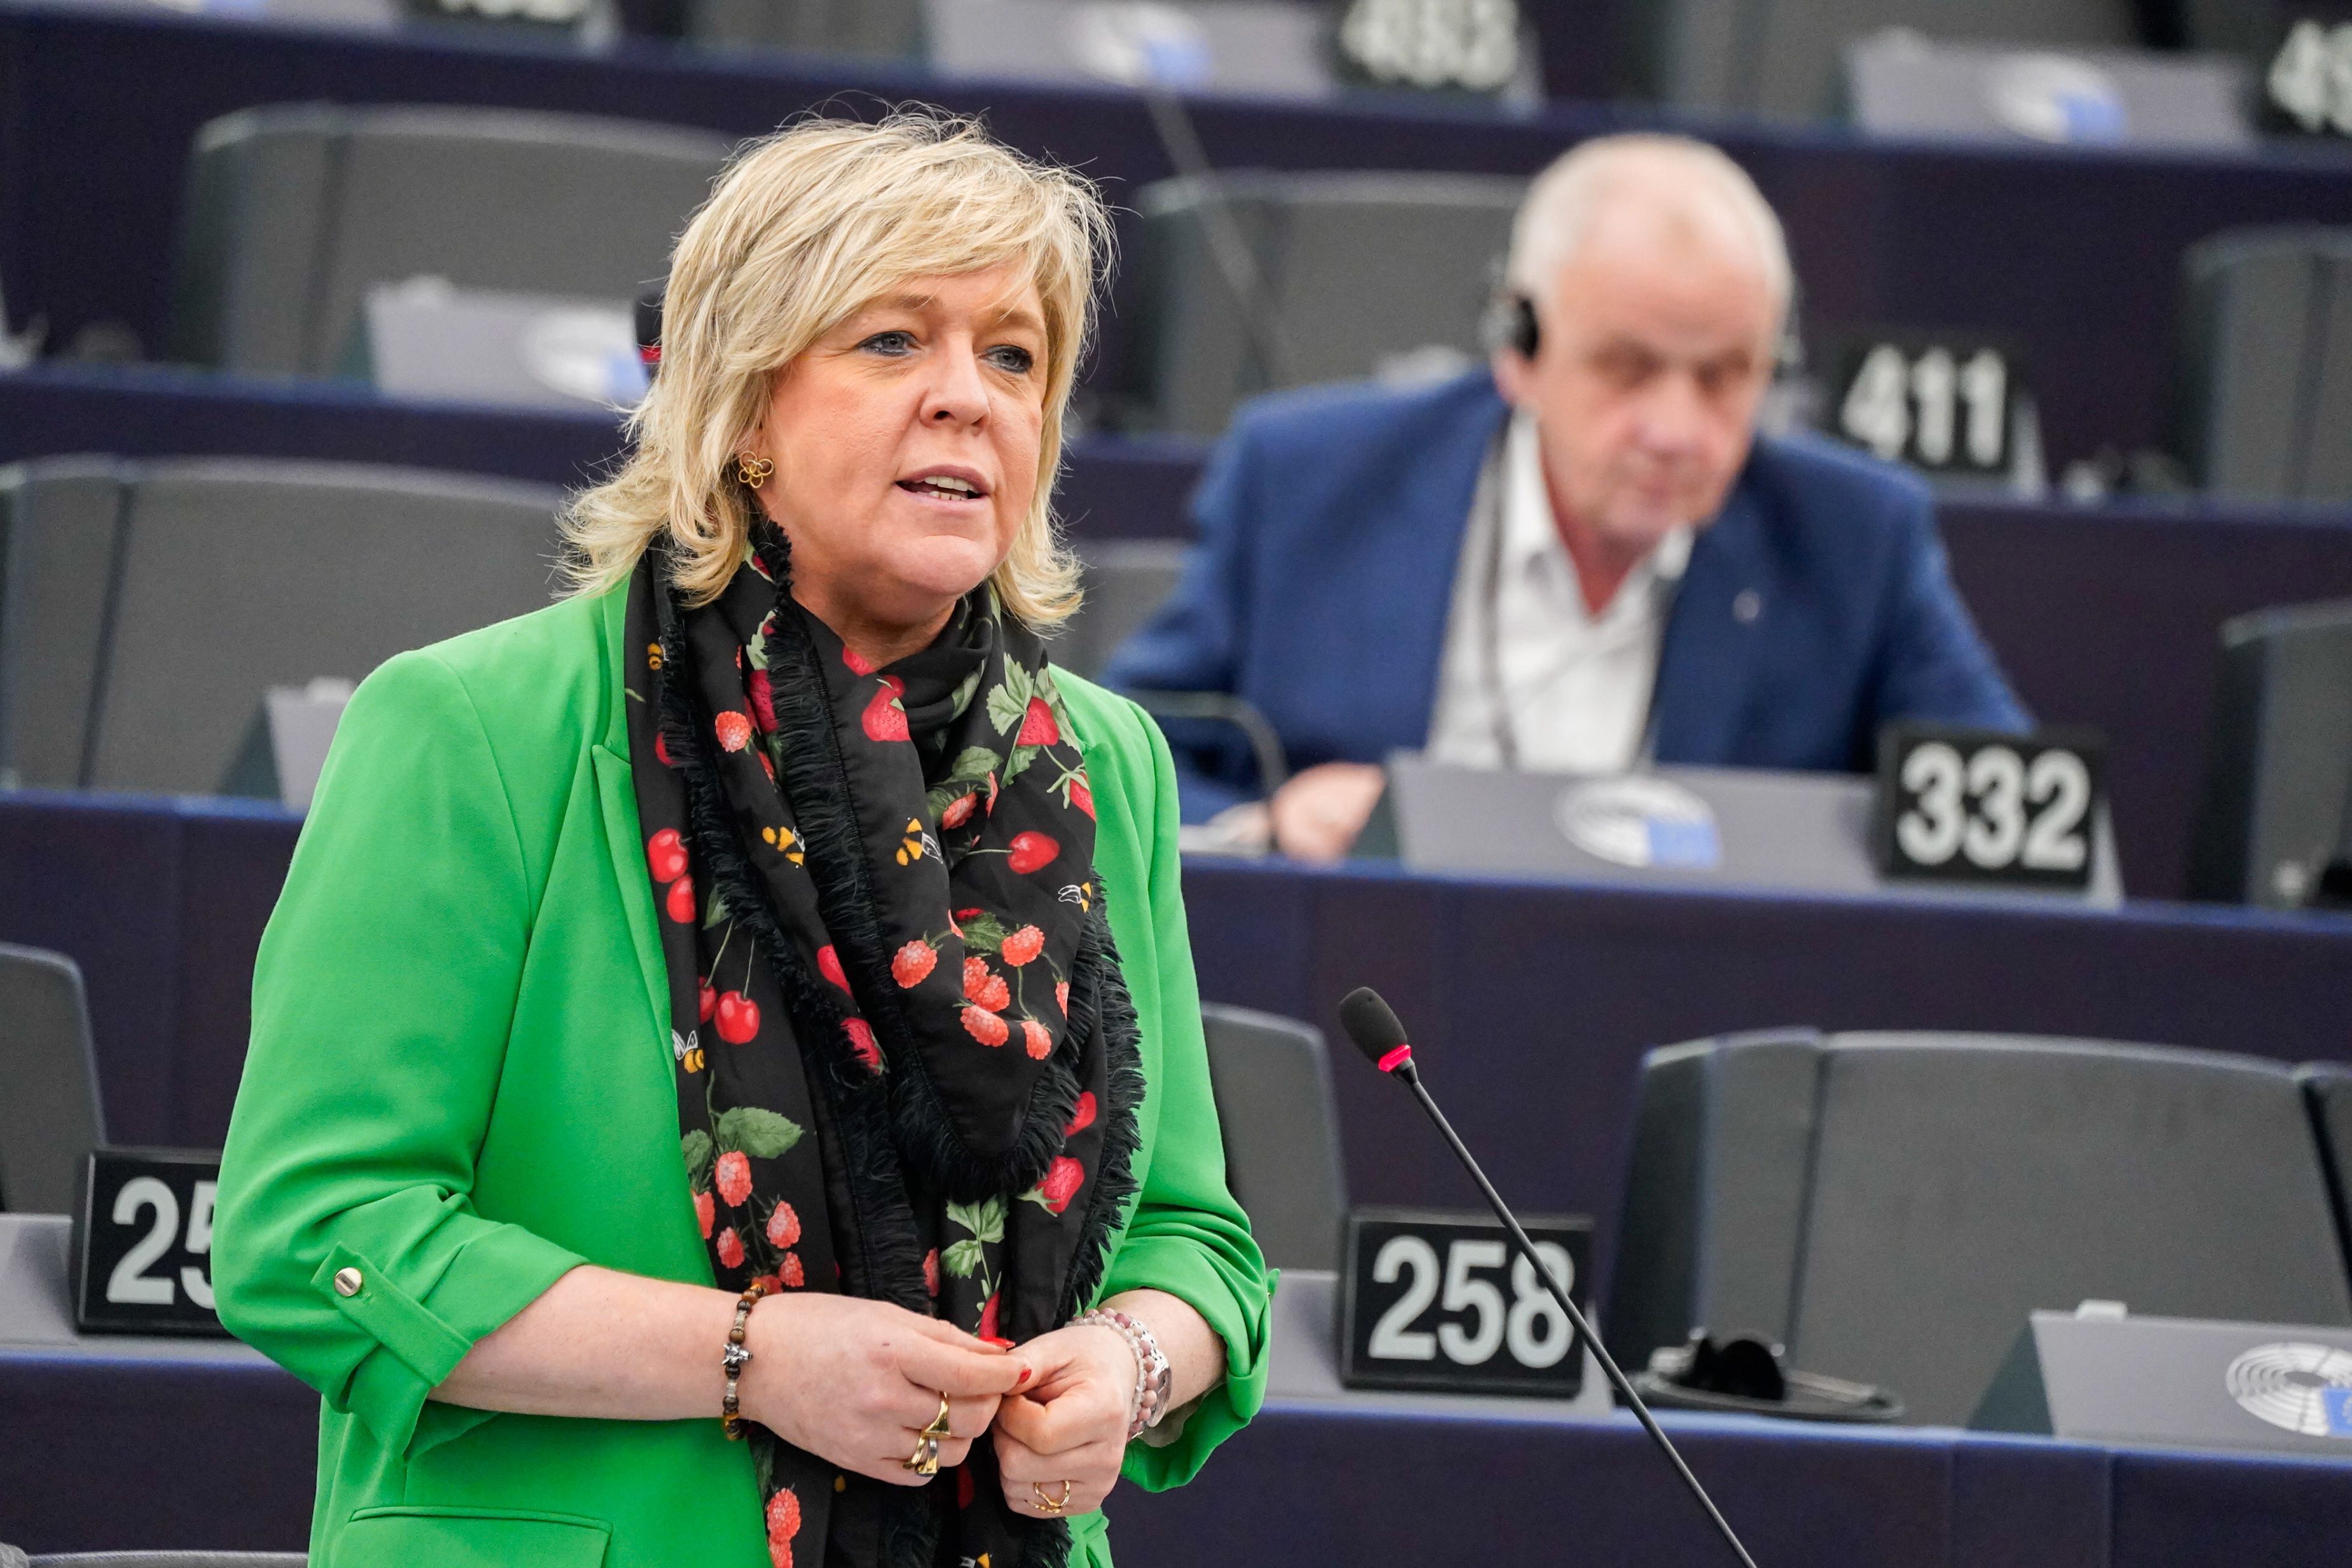 Party backs MEP Vautmans over allegations from former staff